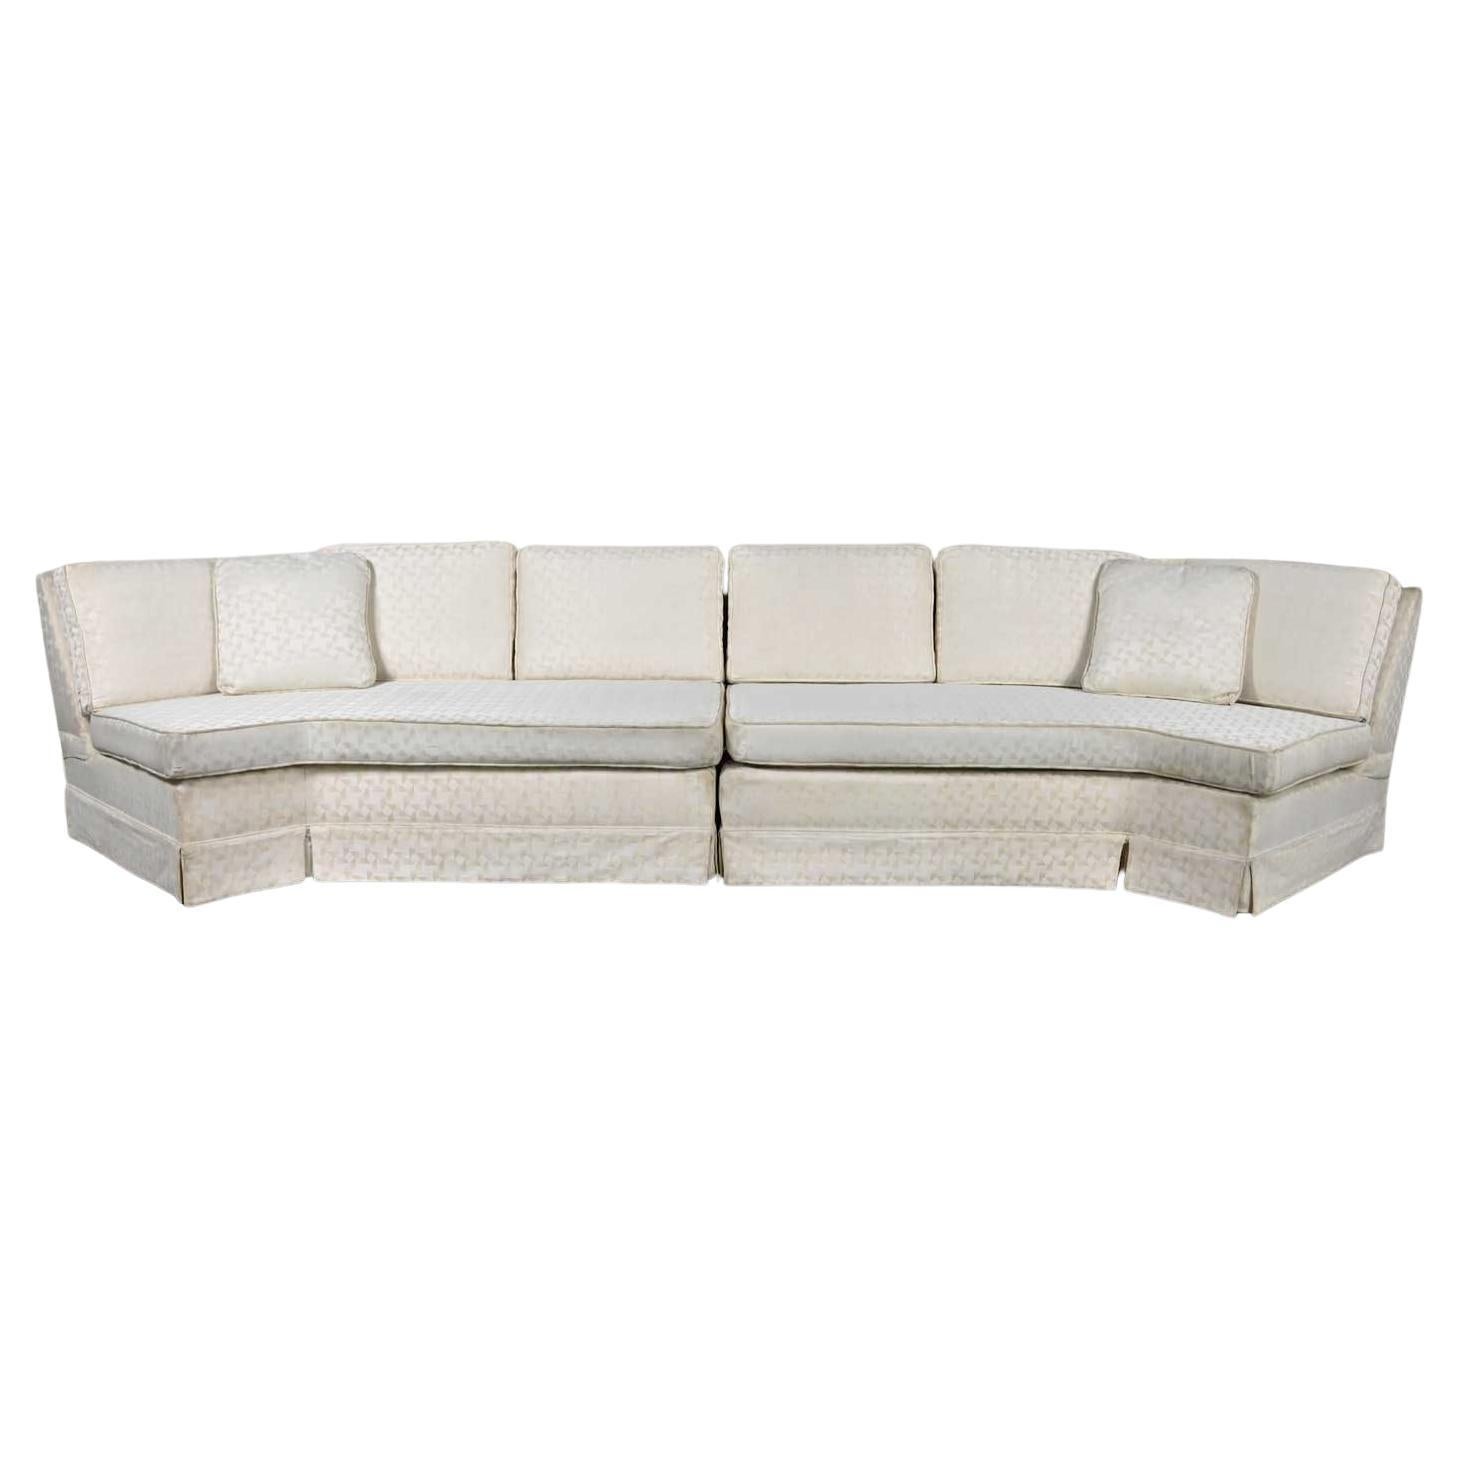 Mid-Century Modern to Modern & Hollywood Regency 2 Piece Angled Sectional Sofa